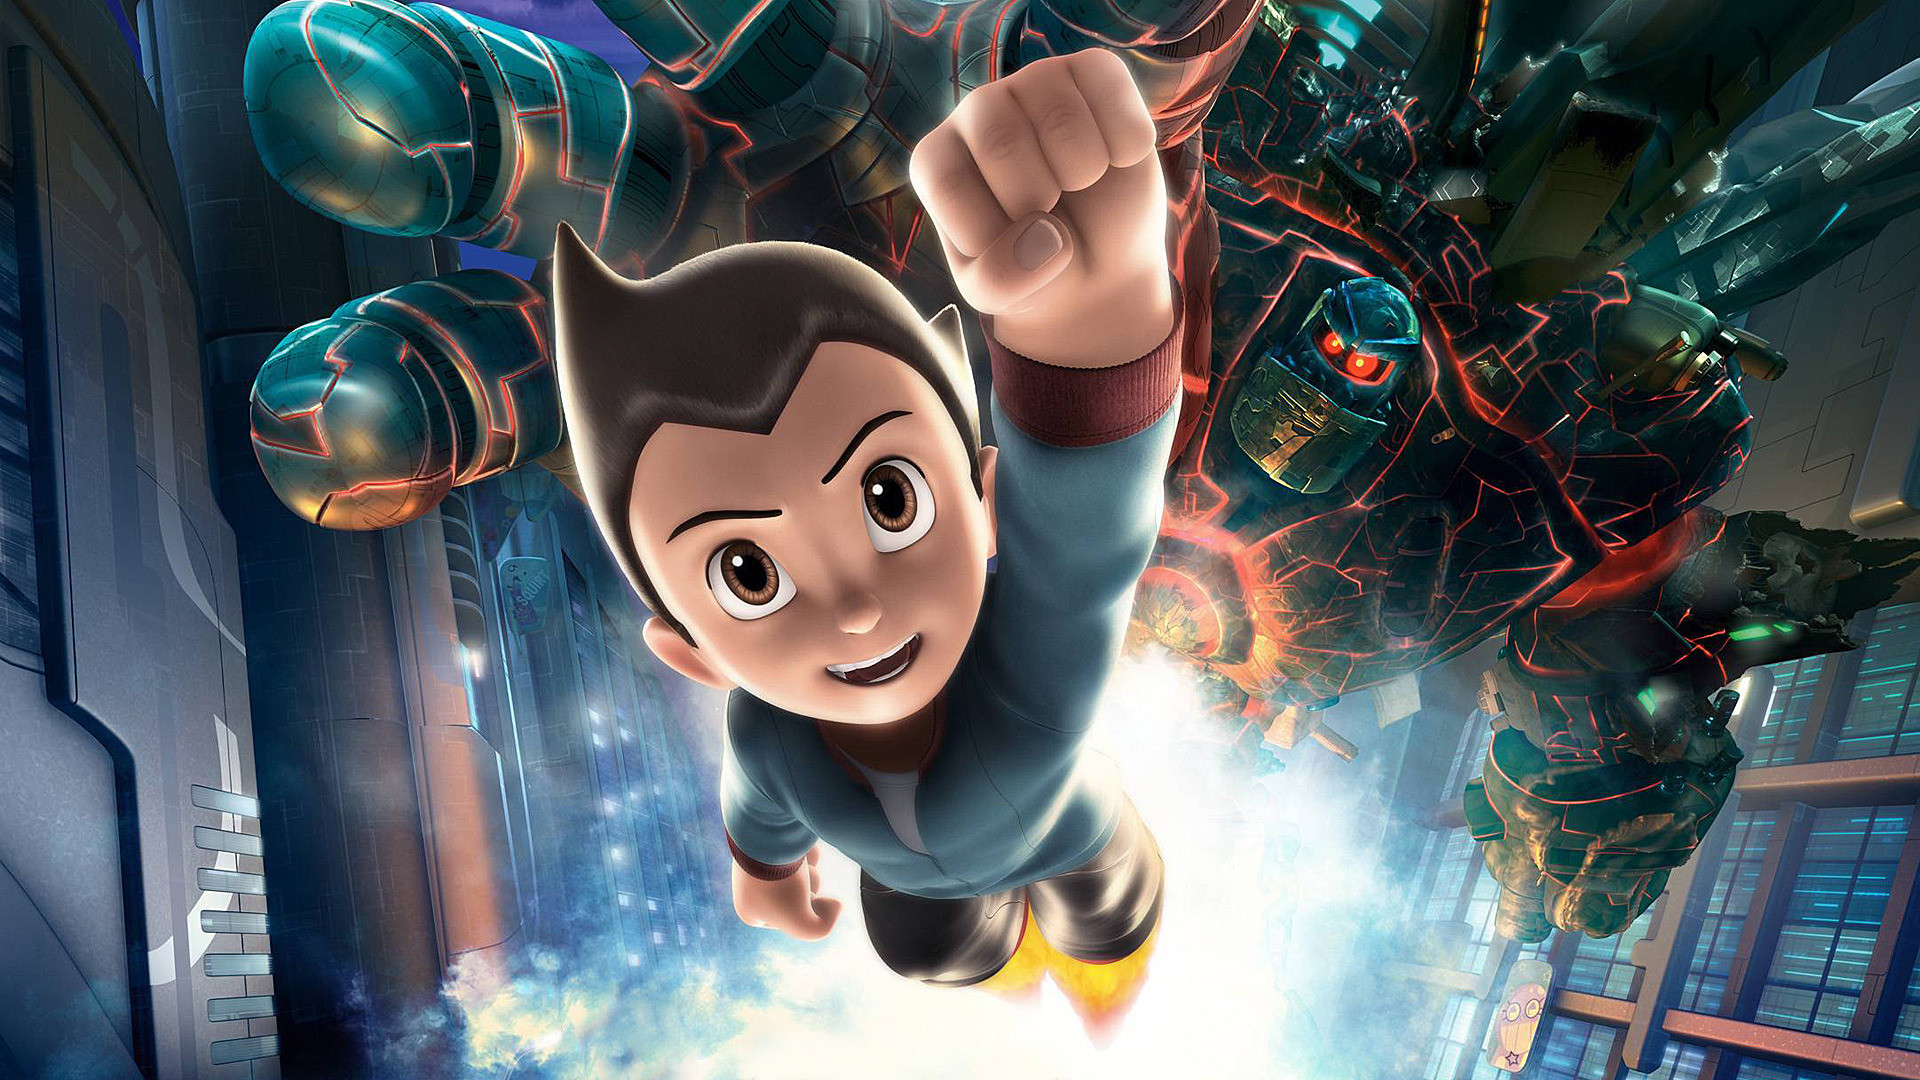 Astro Boy Wallpapers HD Wallpapers 1920x1080